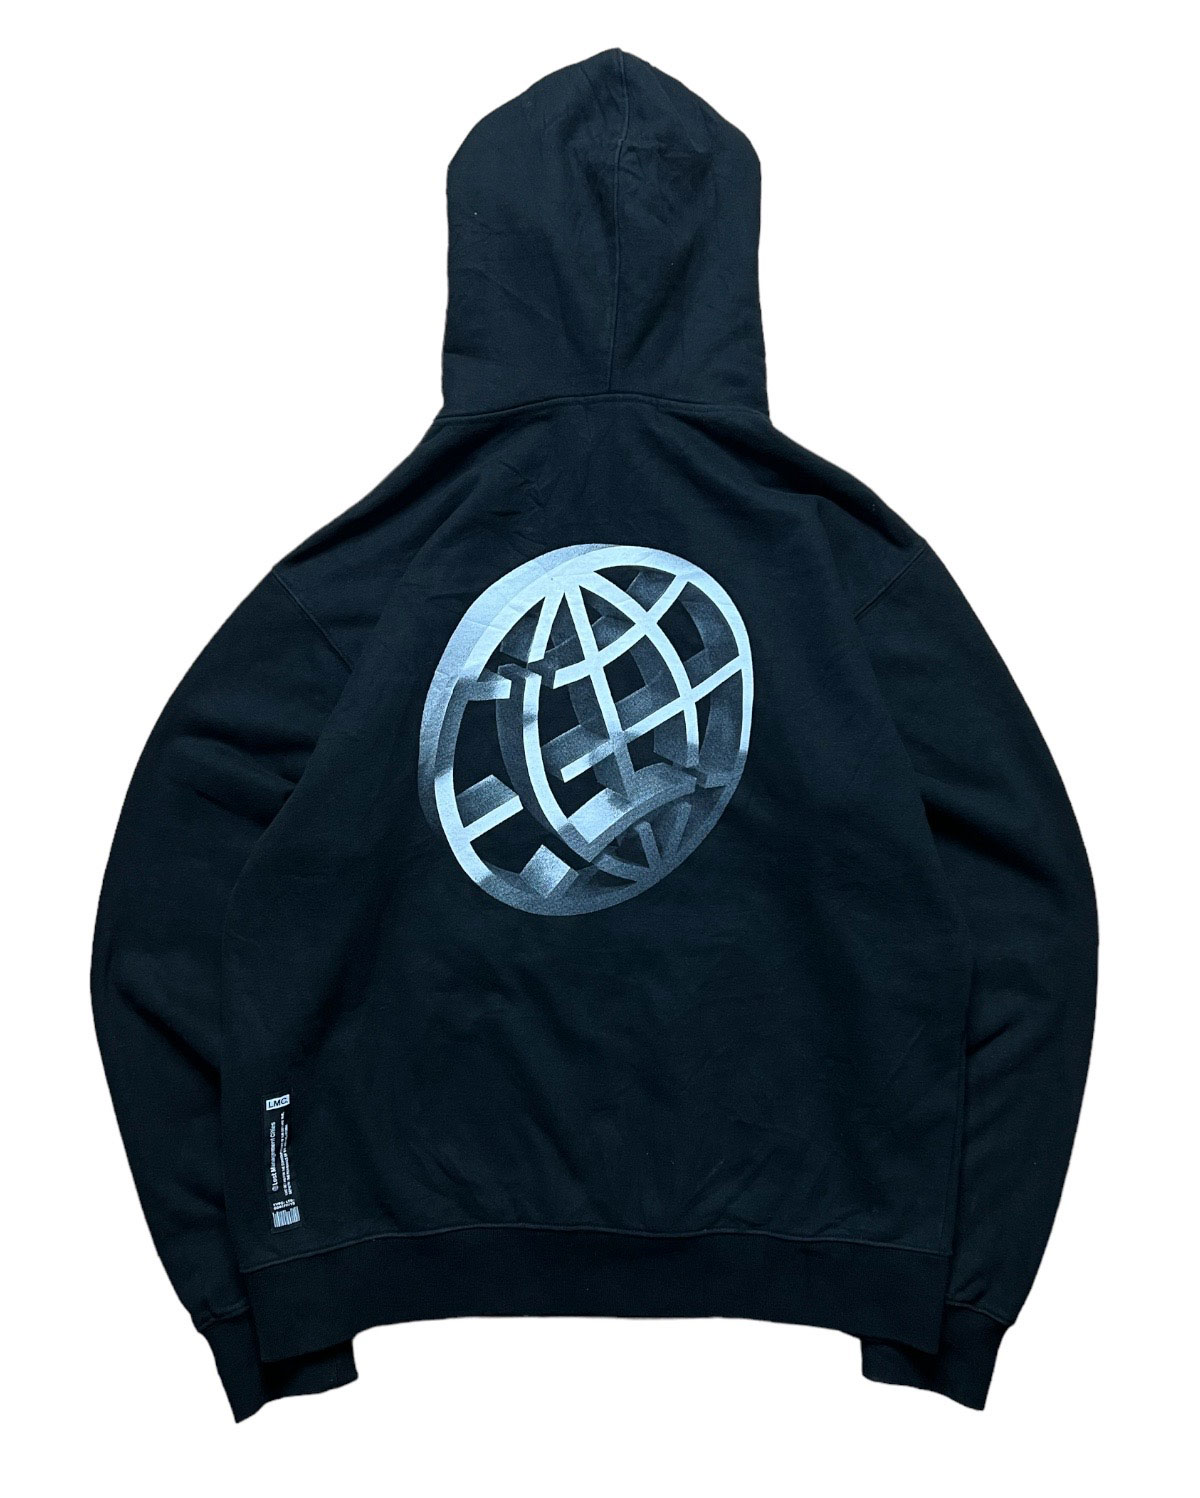 Lost management cities global hoodie